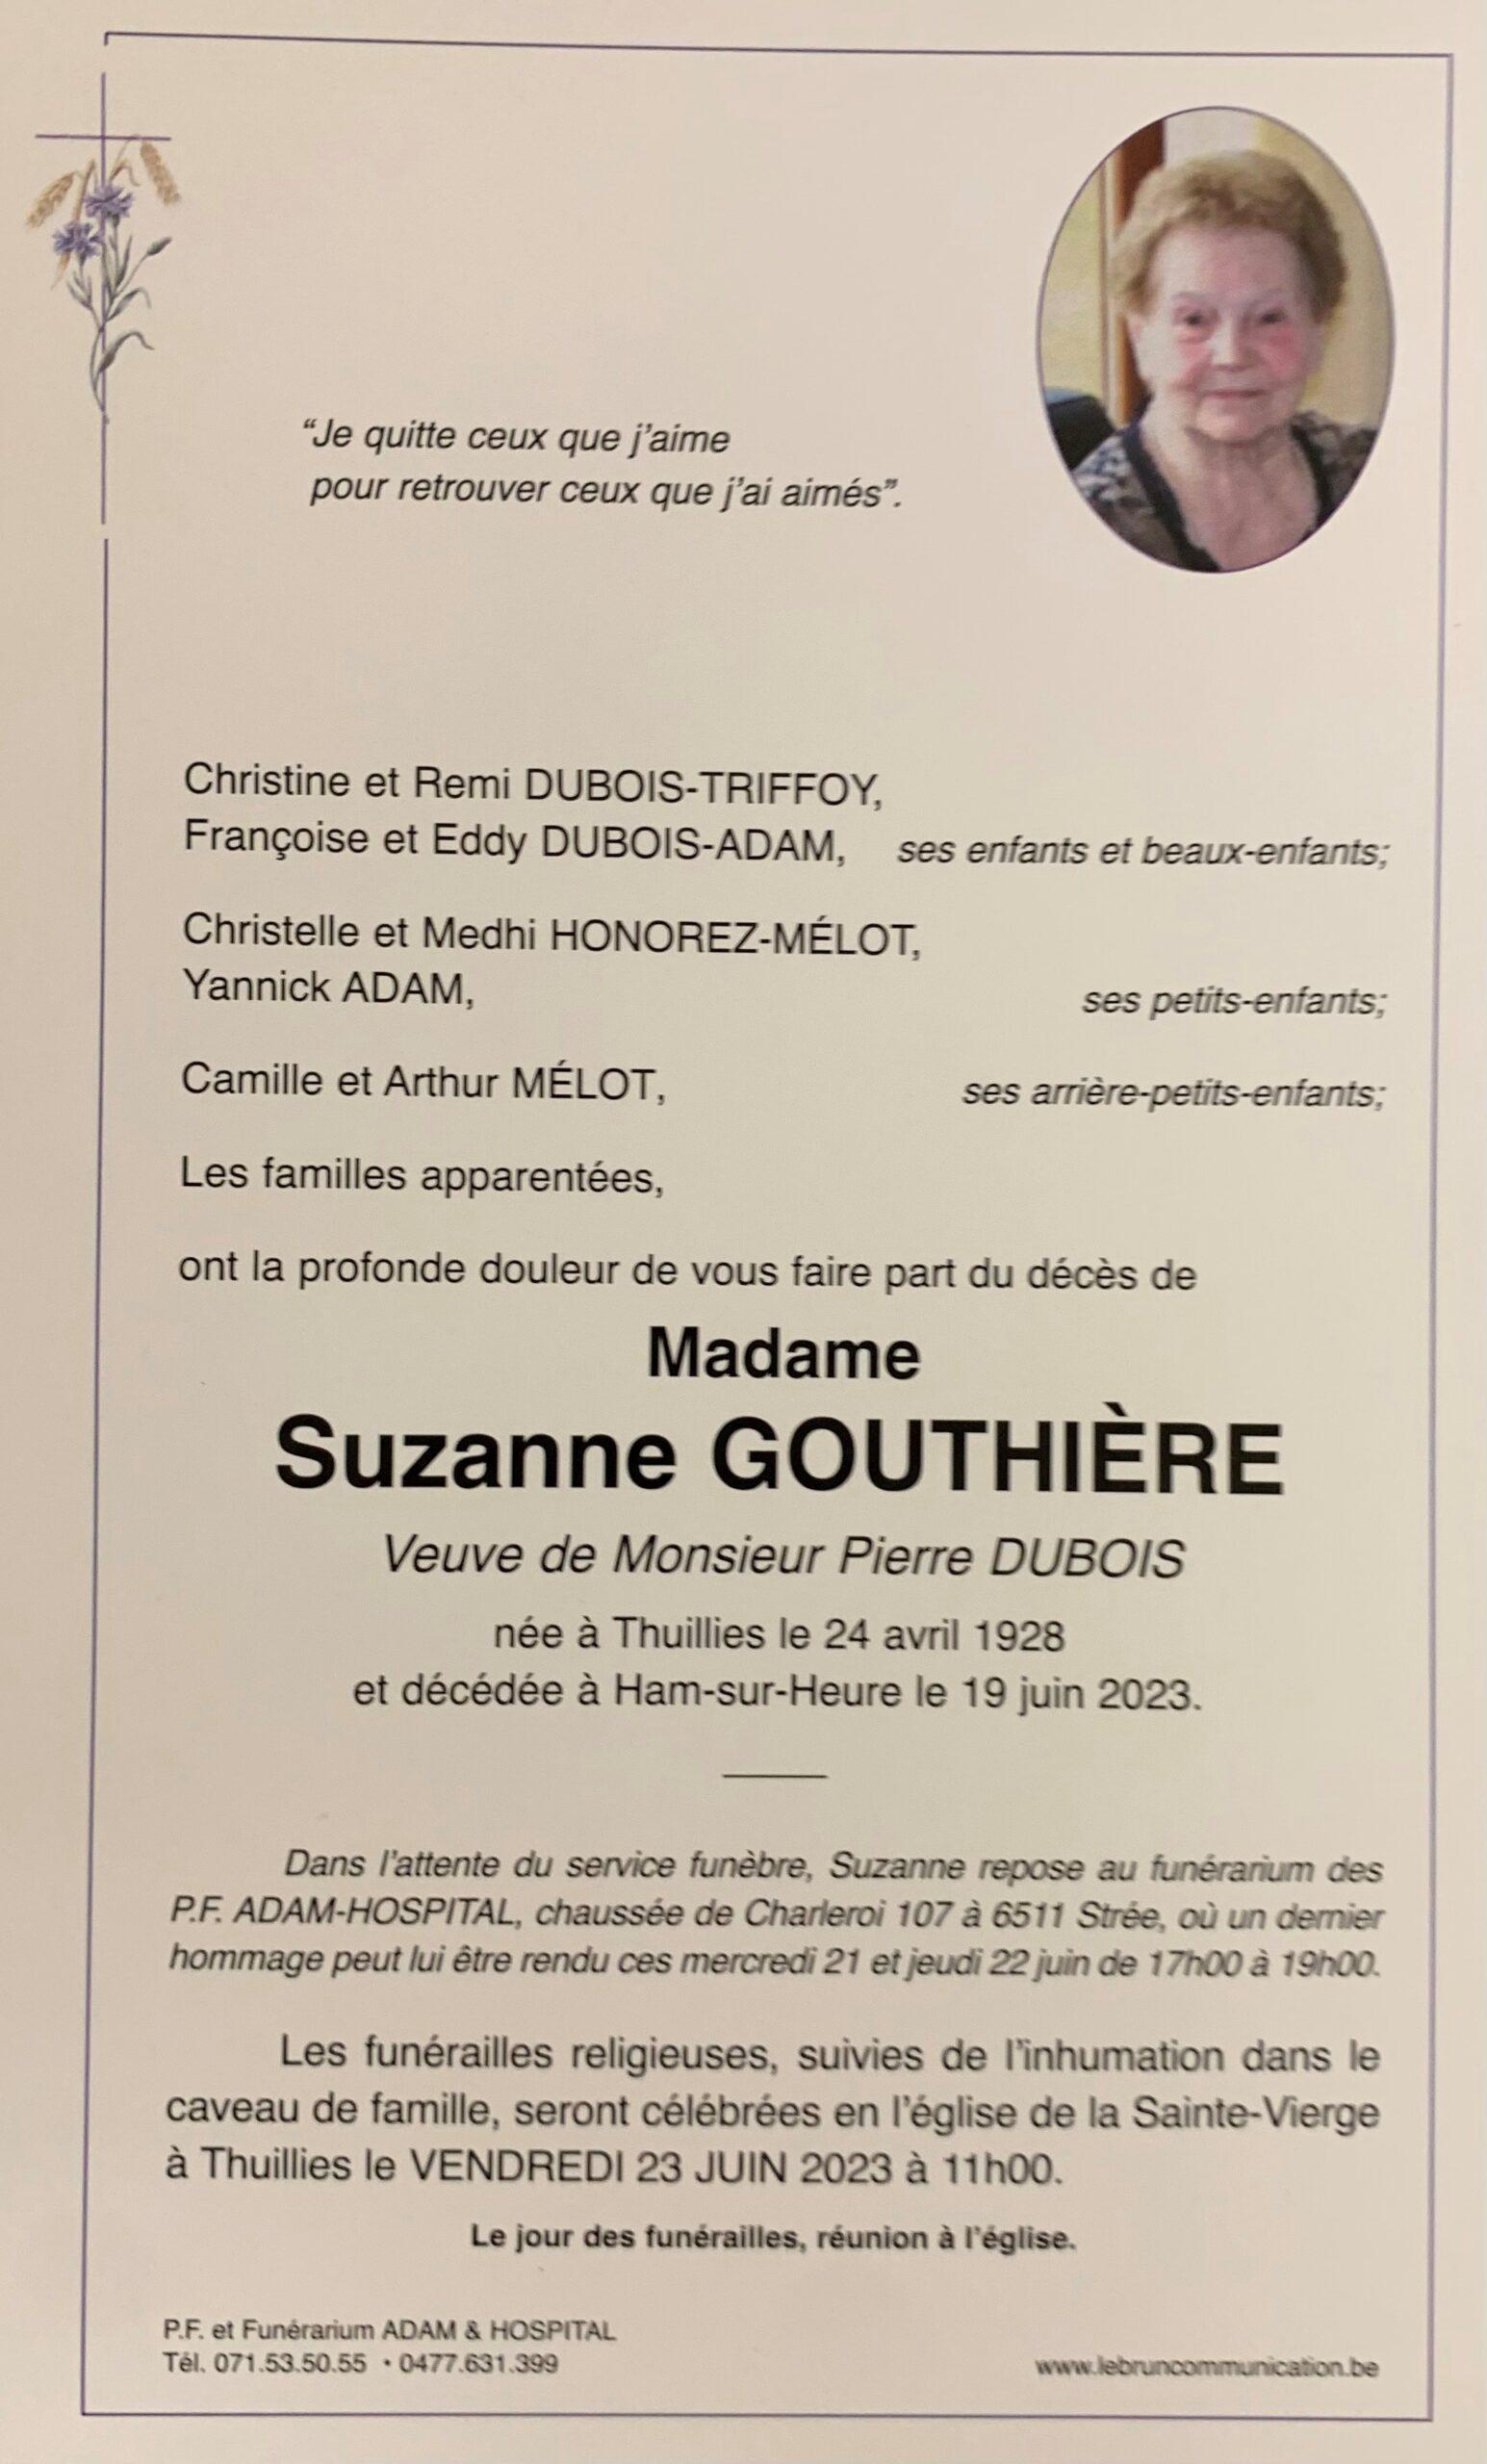 Madame Suzanne Gouthiere scaled | Funérailles Adam Hospital